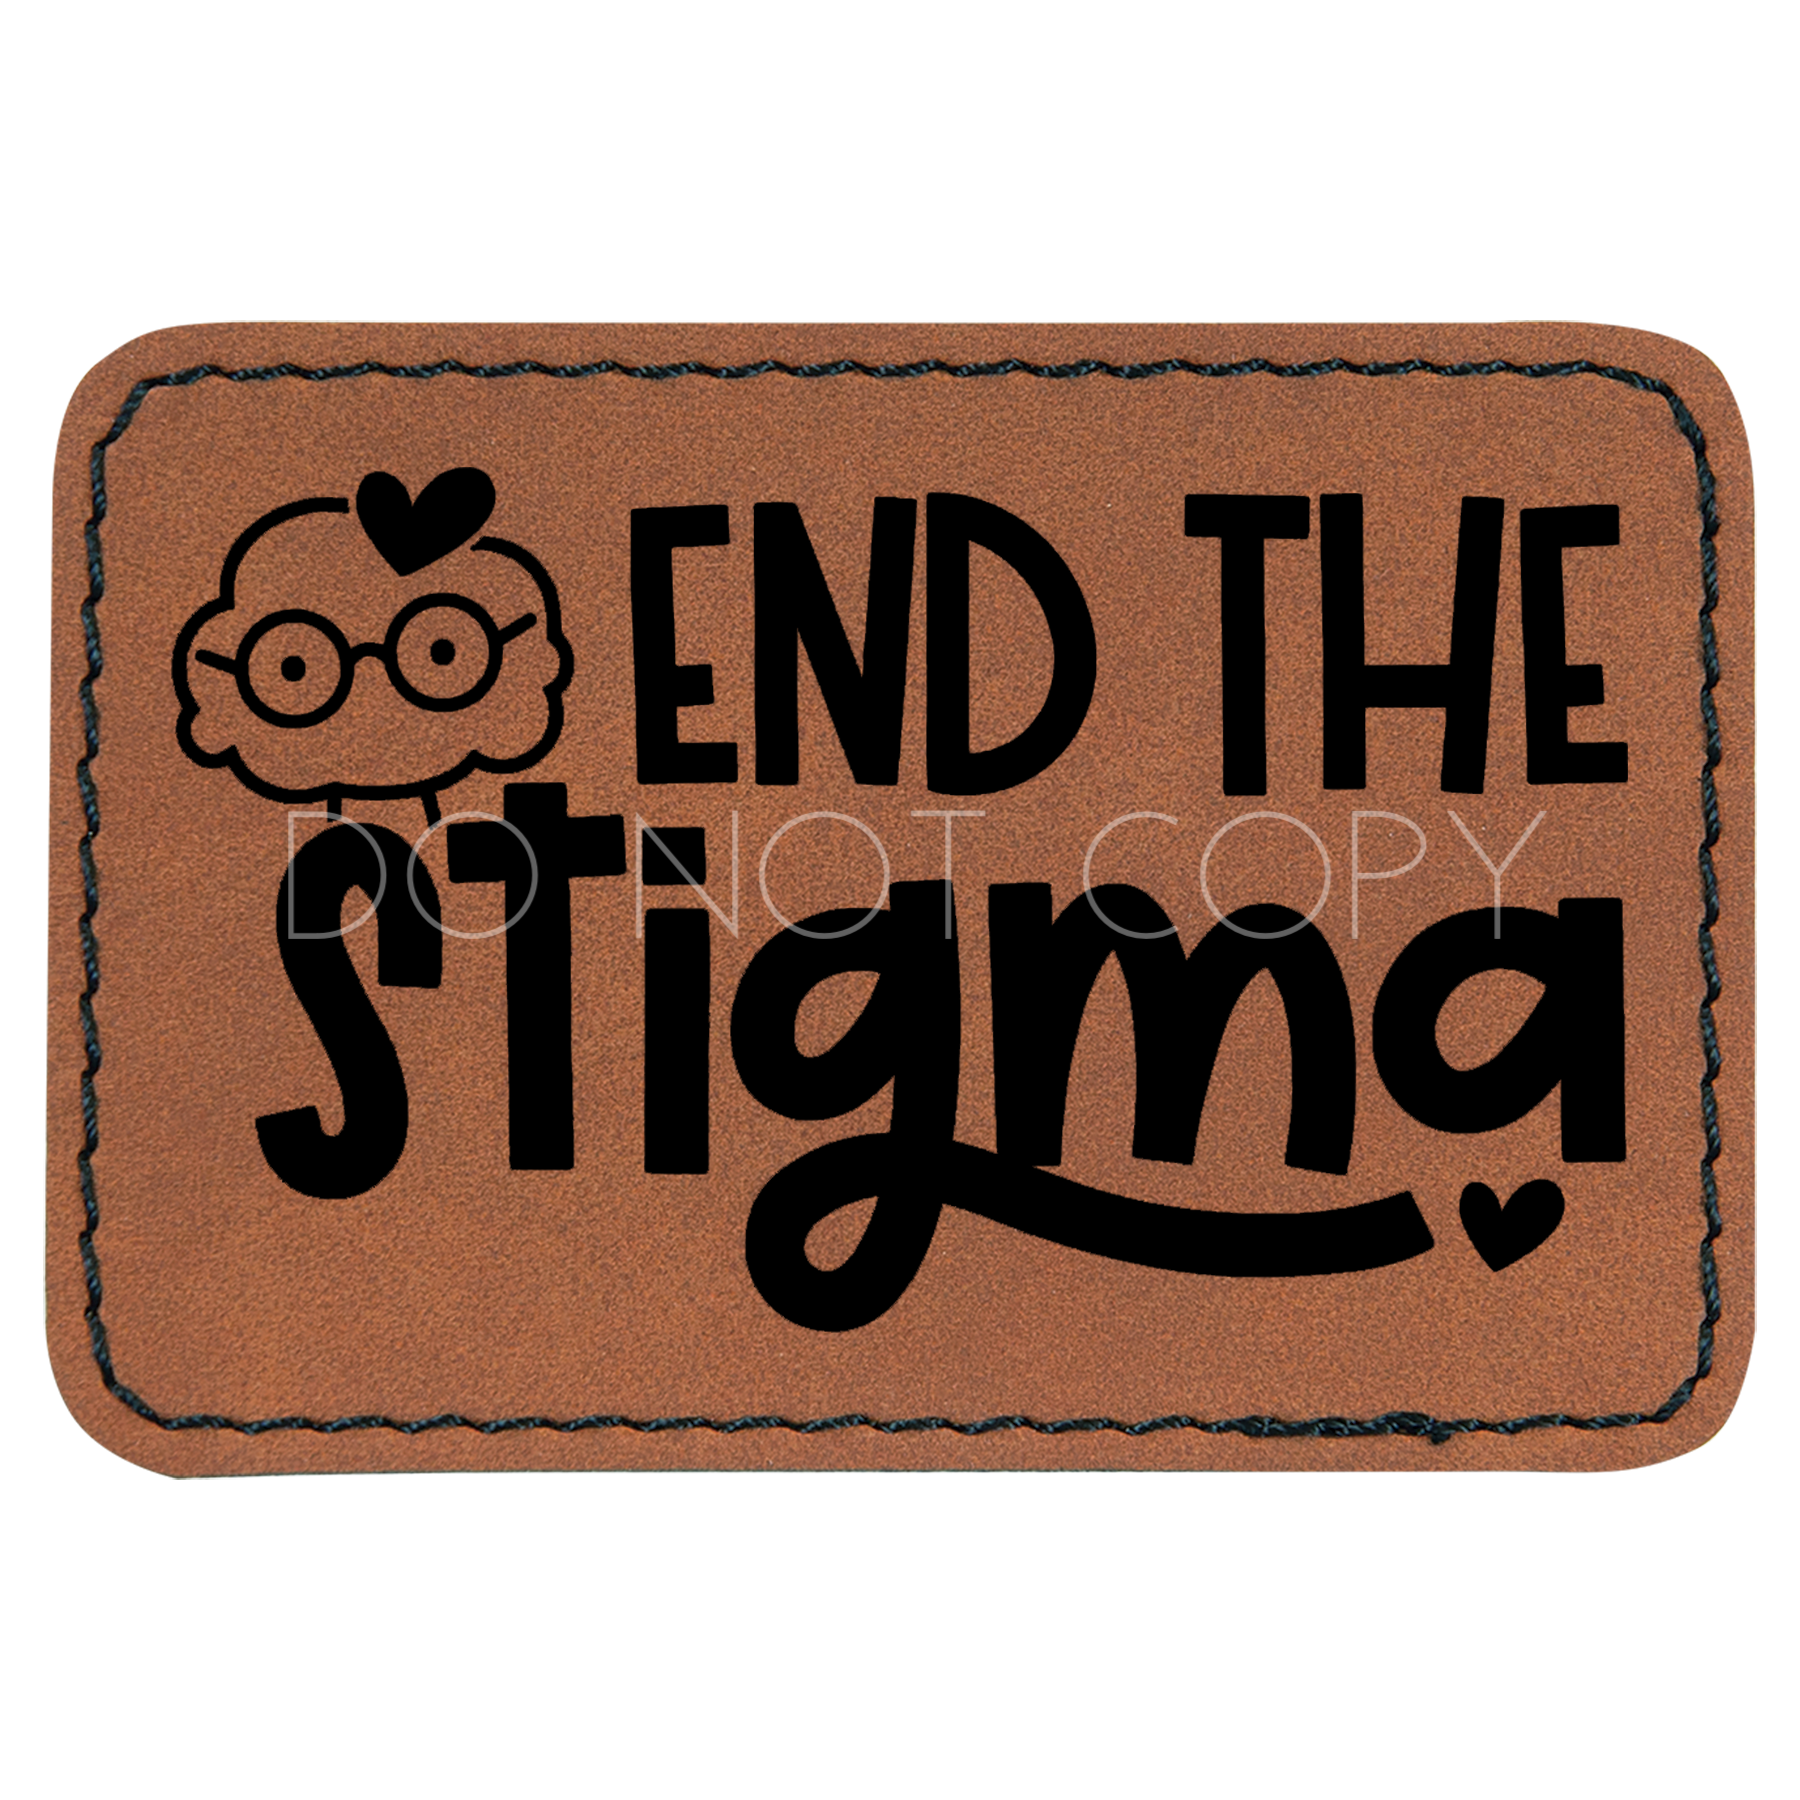 End The Stigma Patch